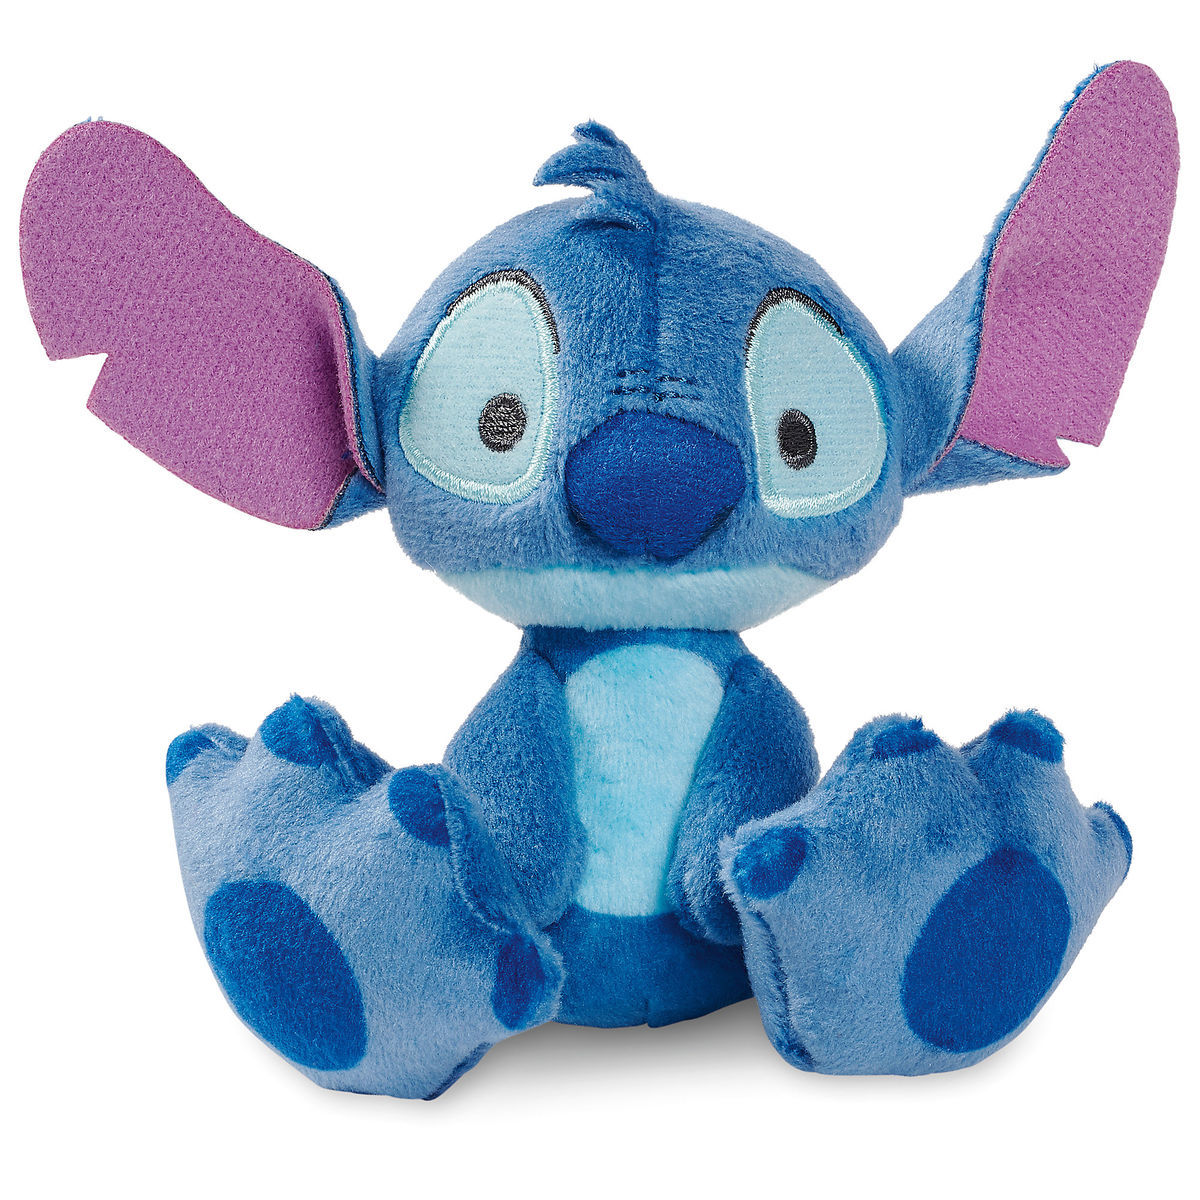 New Disney Collectibles “Tiny Big Feet” Out Now